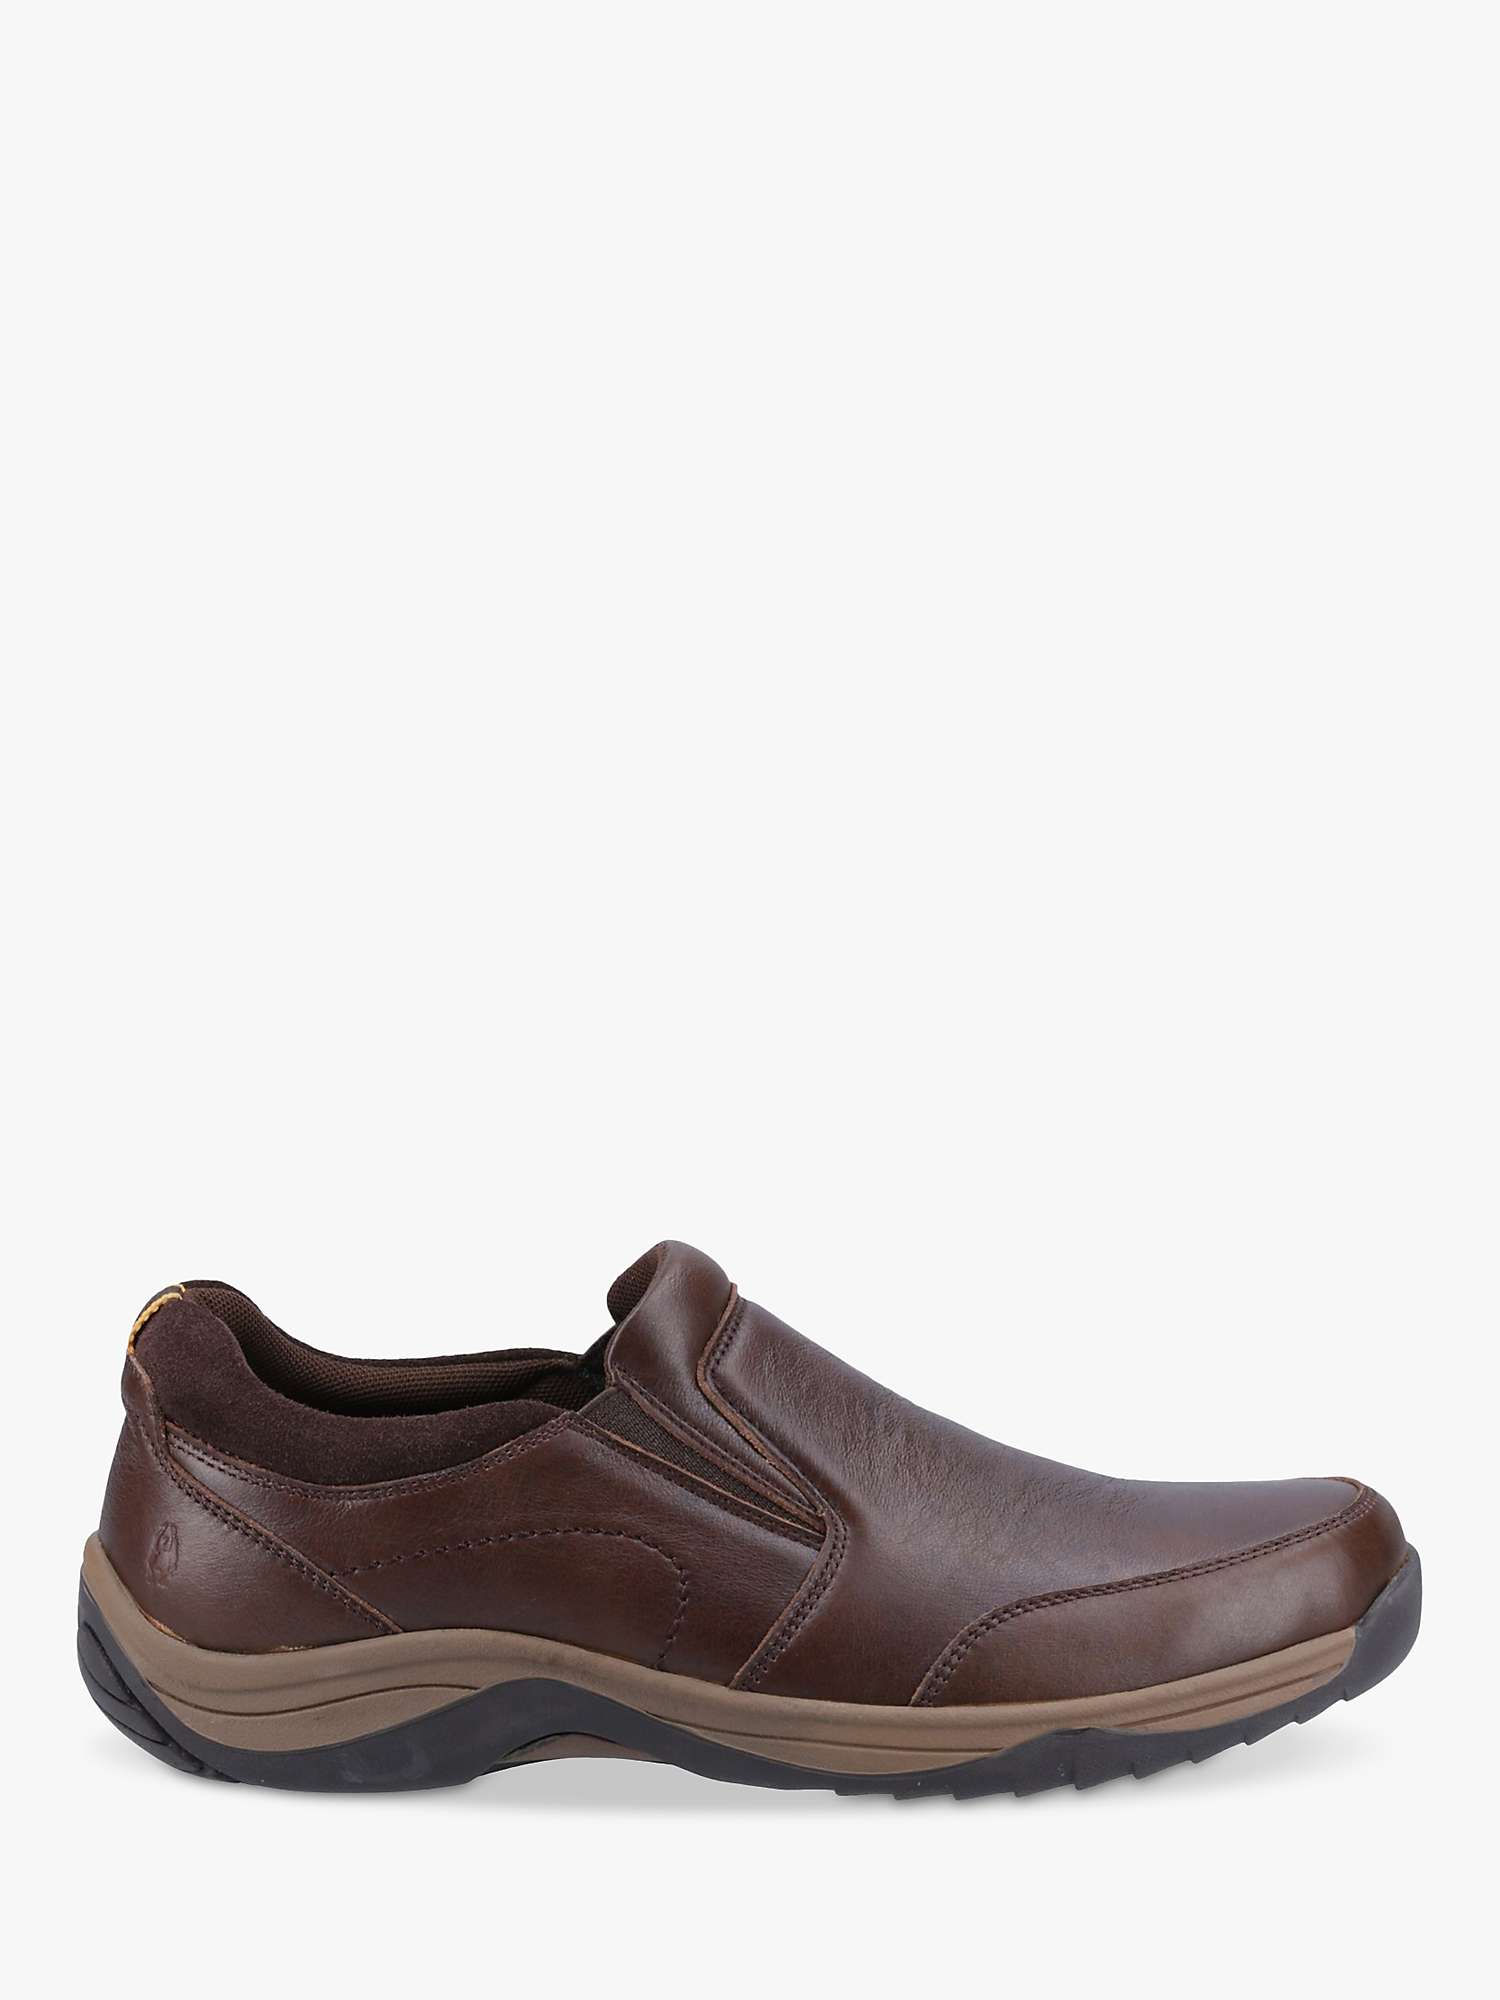 Buy Hush Puppies Donald Leather Shoes, Coffee Online at johnlewis.com